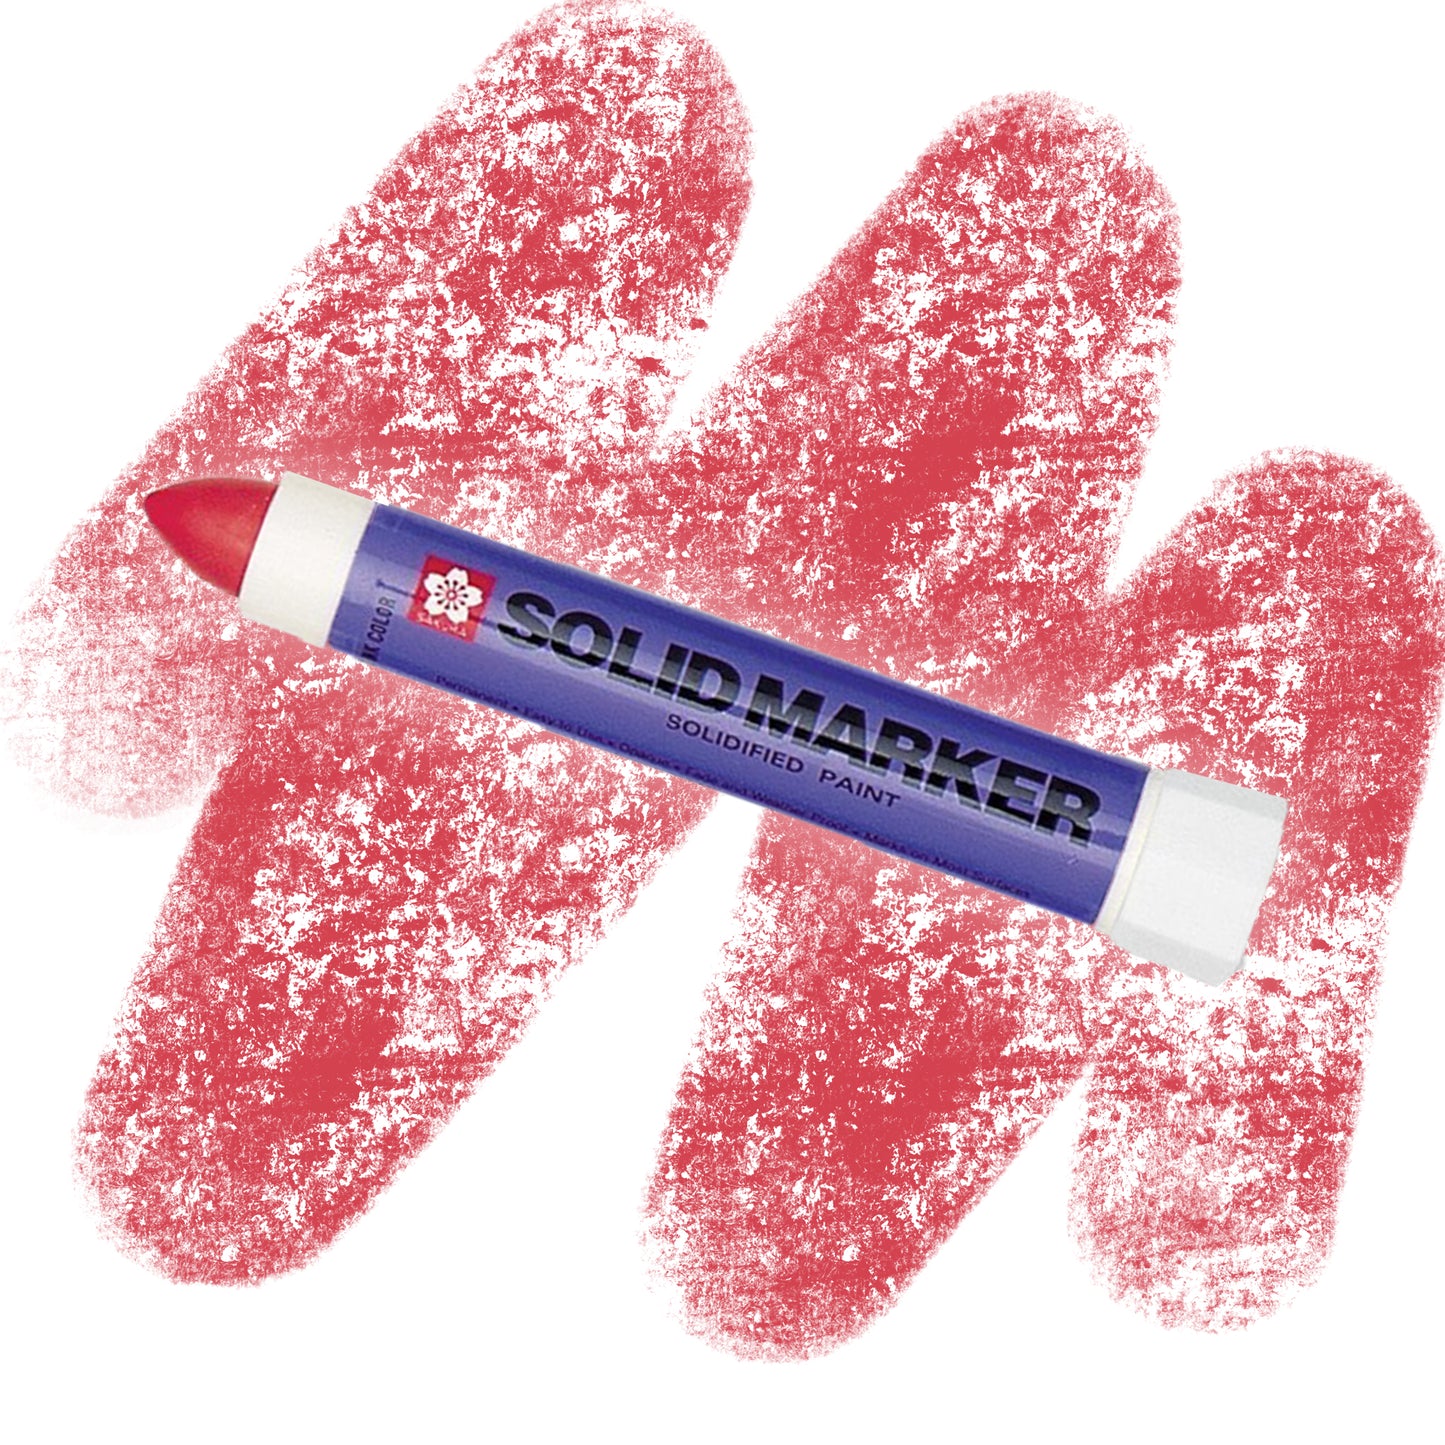 A red marker with a purple label that reads " SOLID MARKER" with a red crayon swatch.